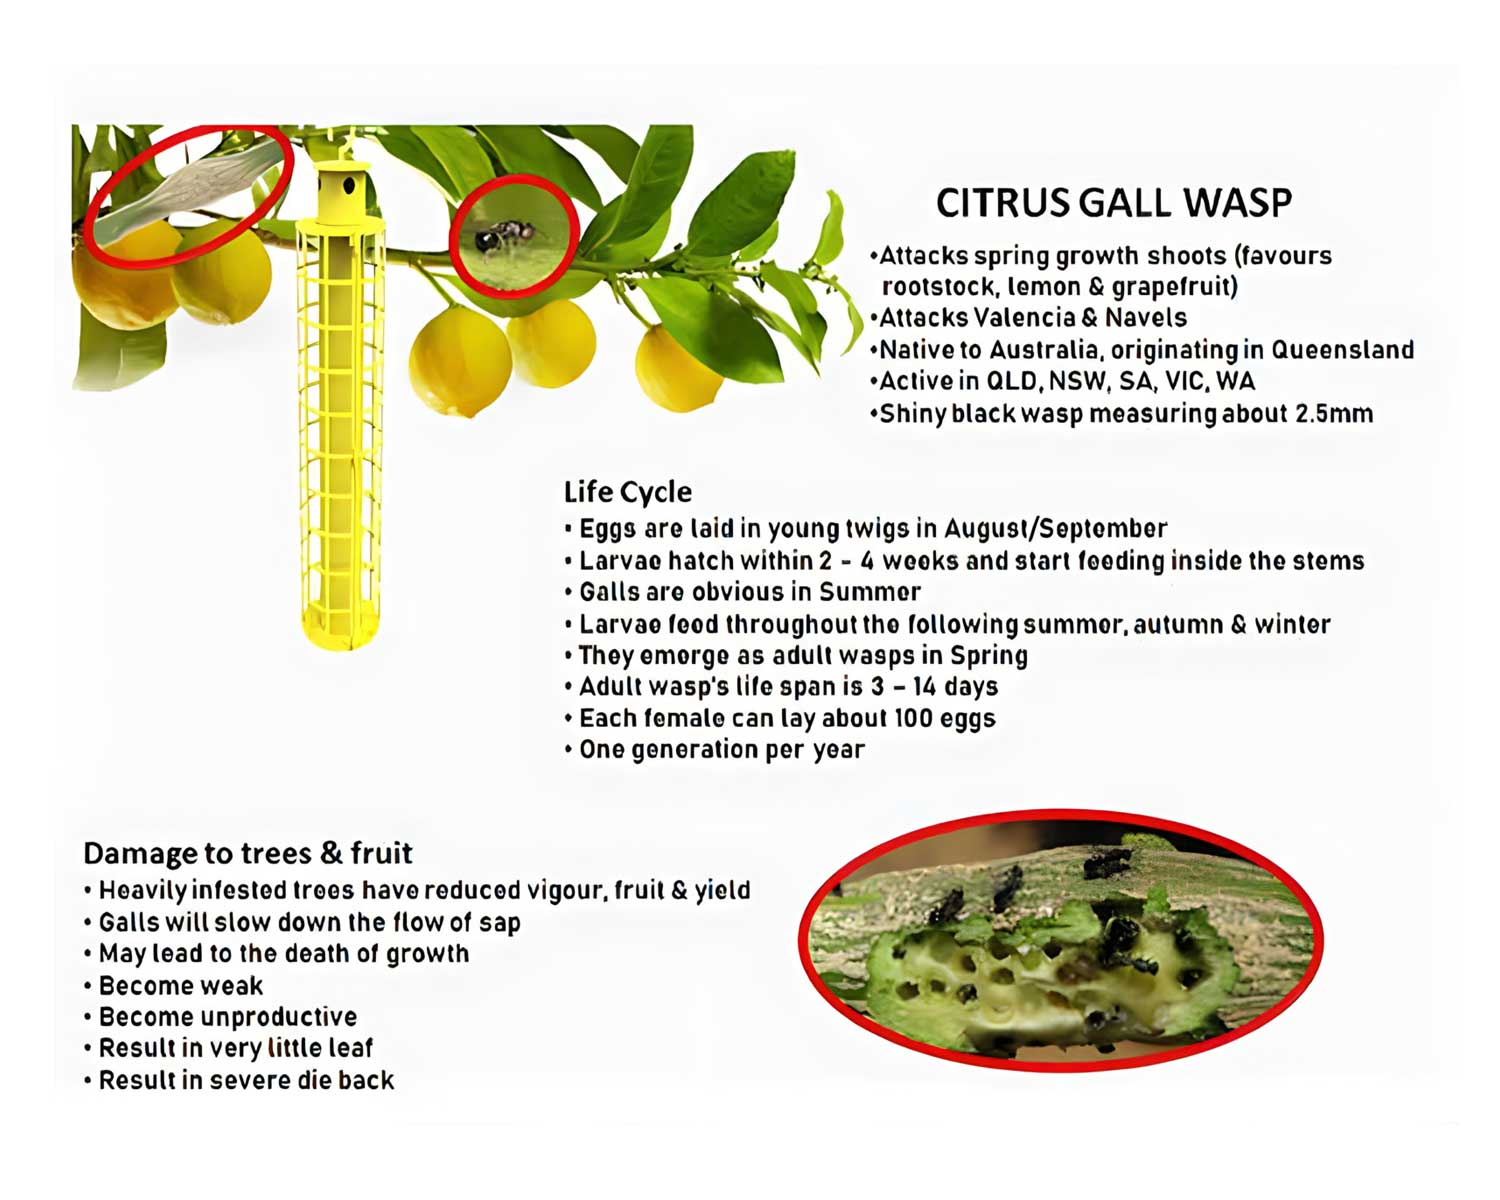 Citrus Gall Wasp lifecycle details